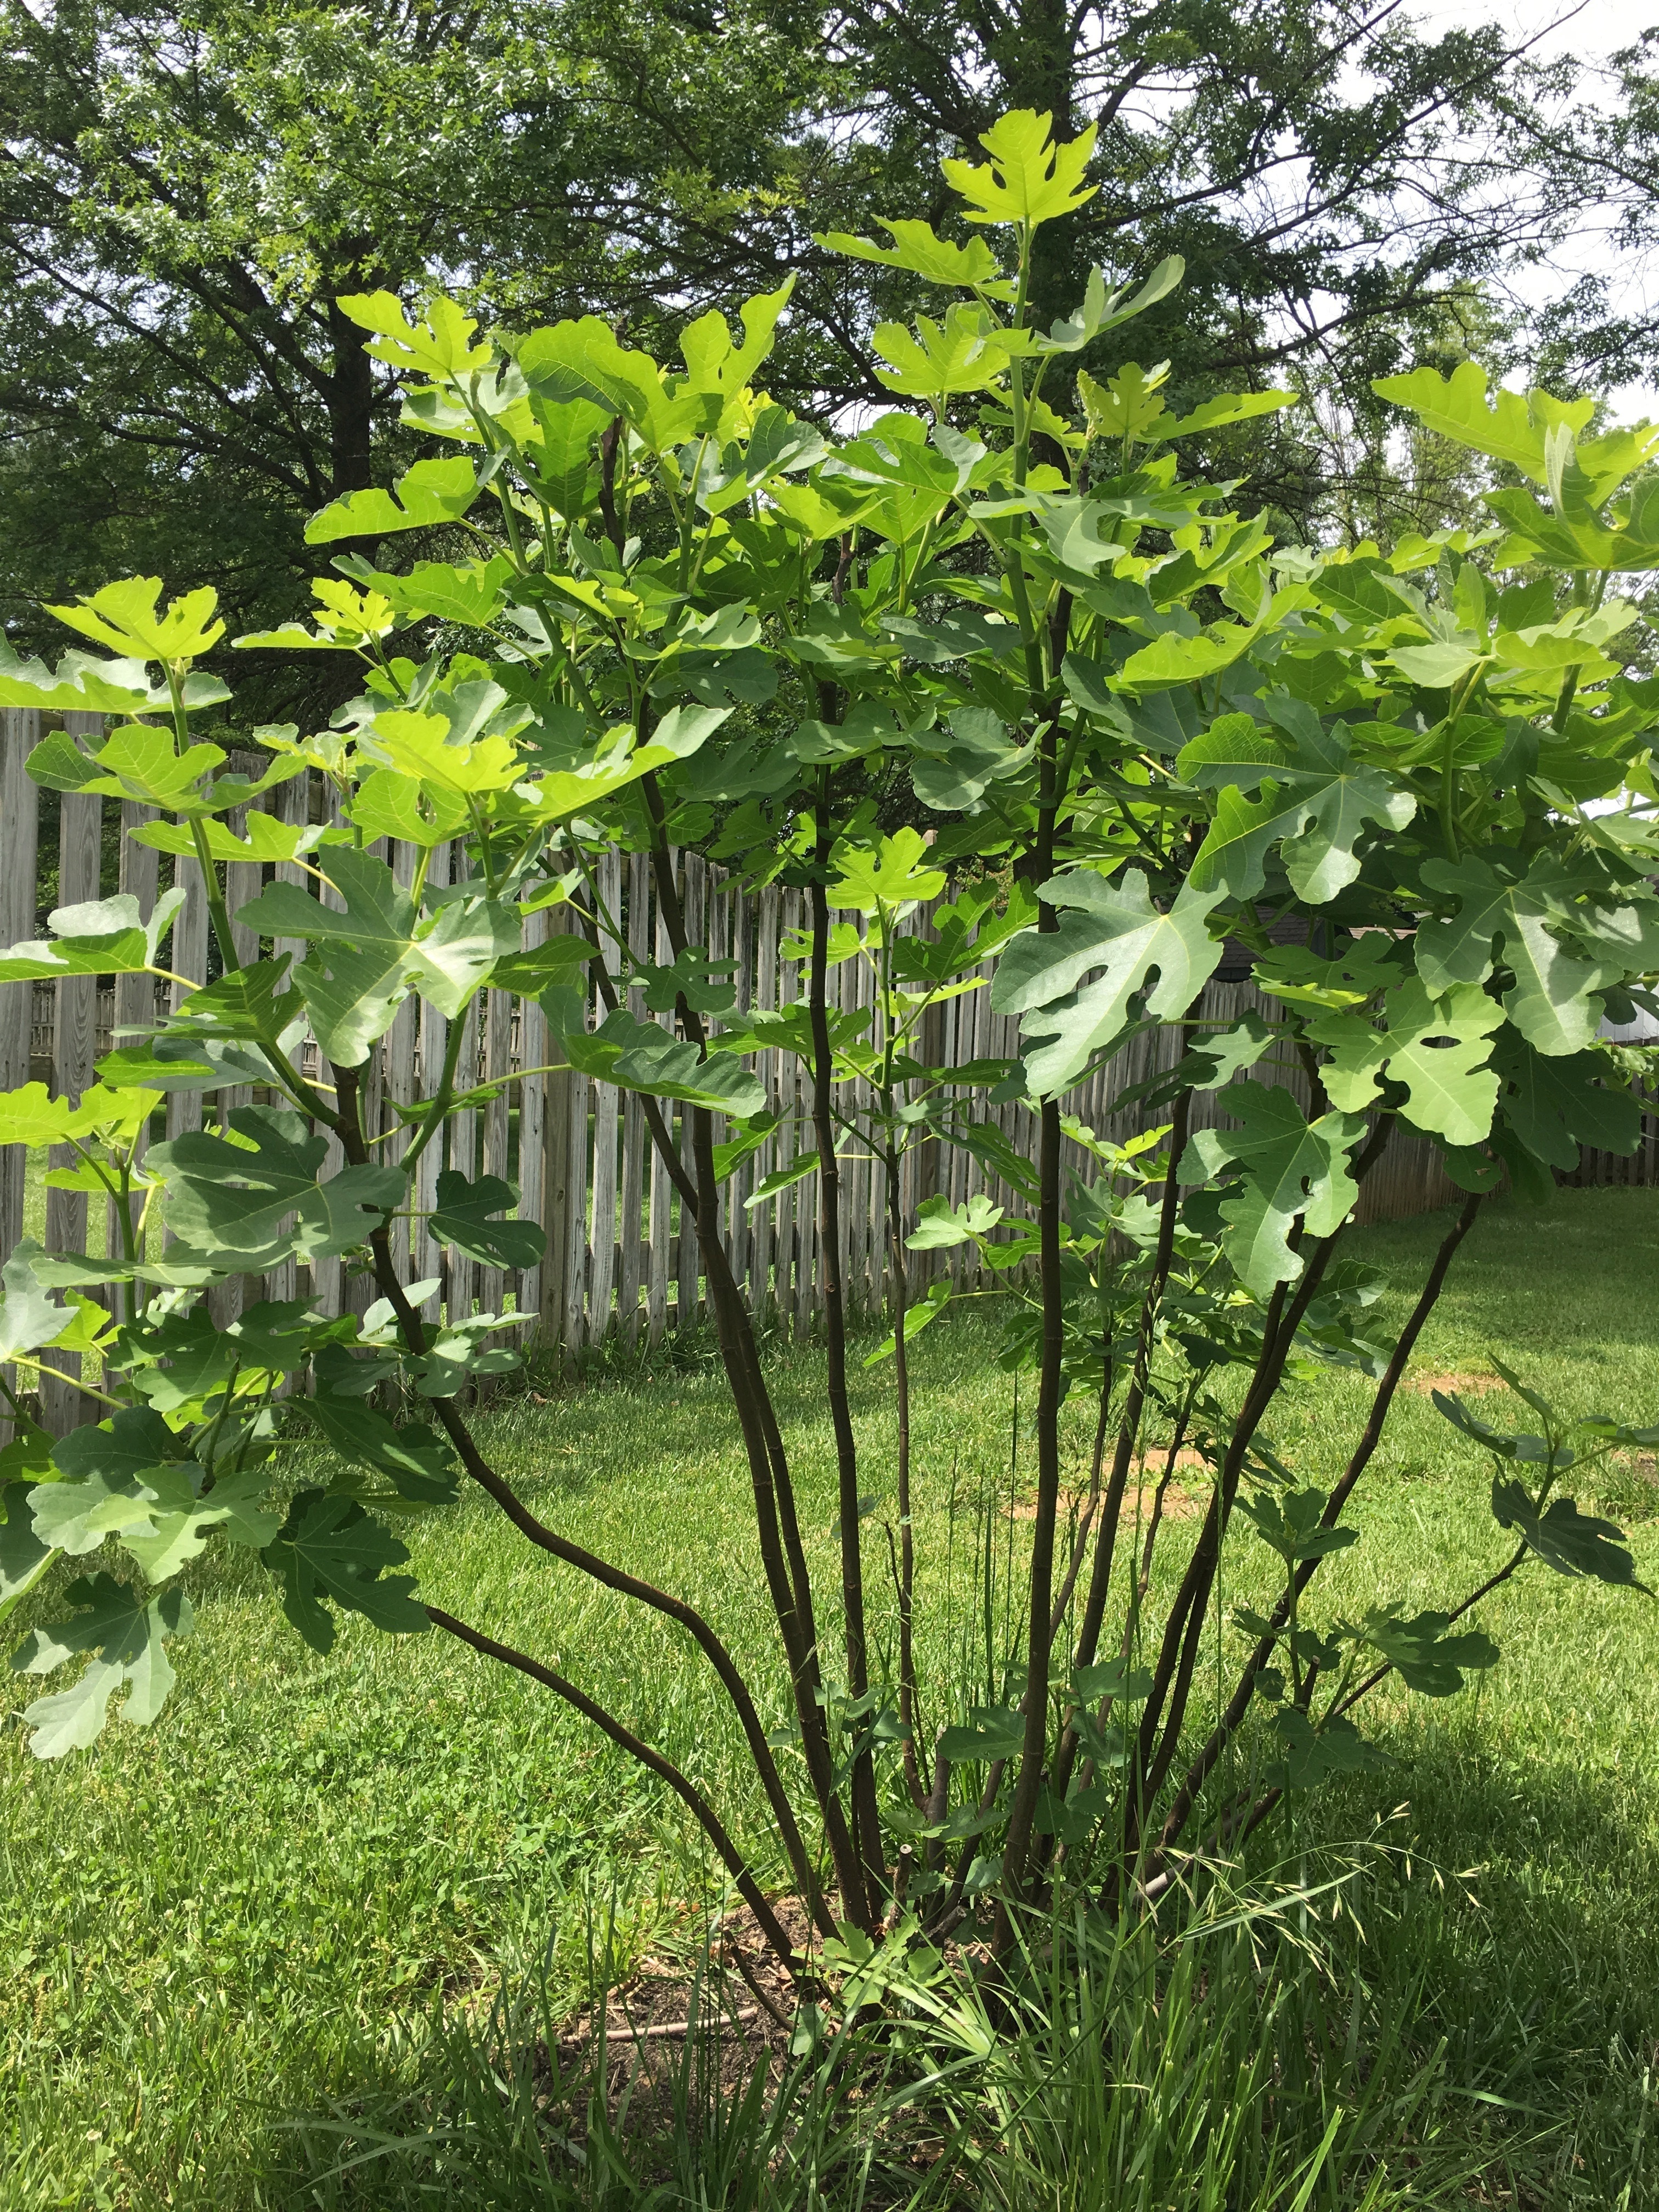 Should I prune tree - Ask Extension